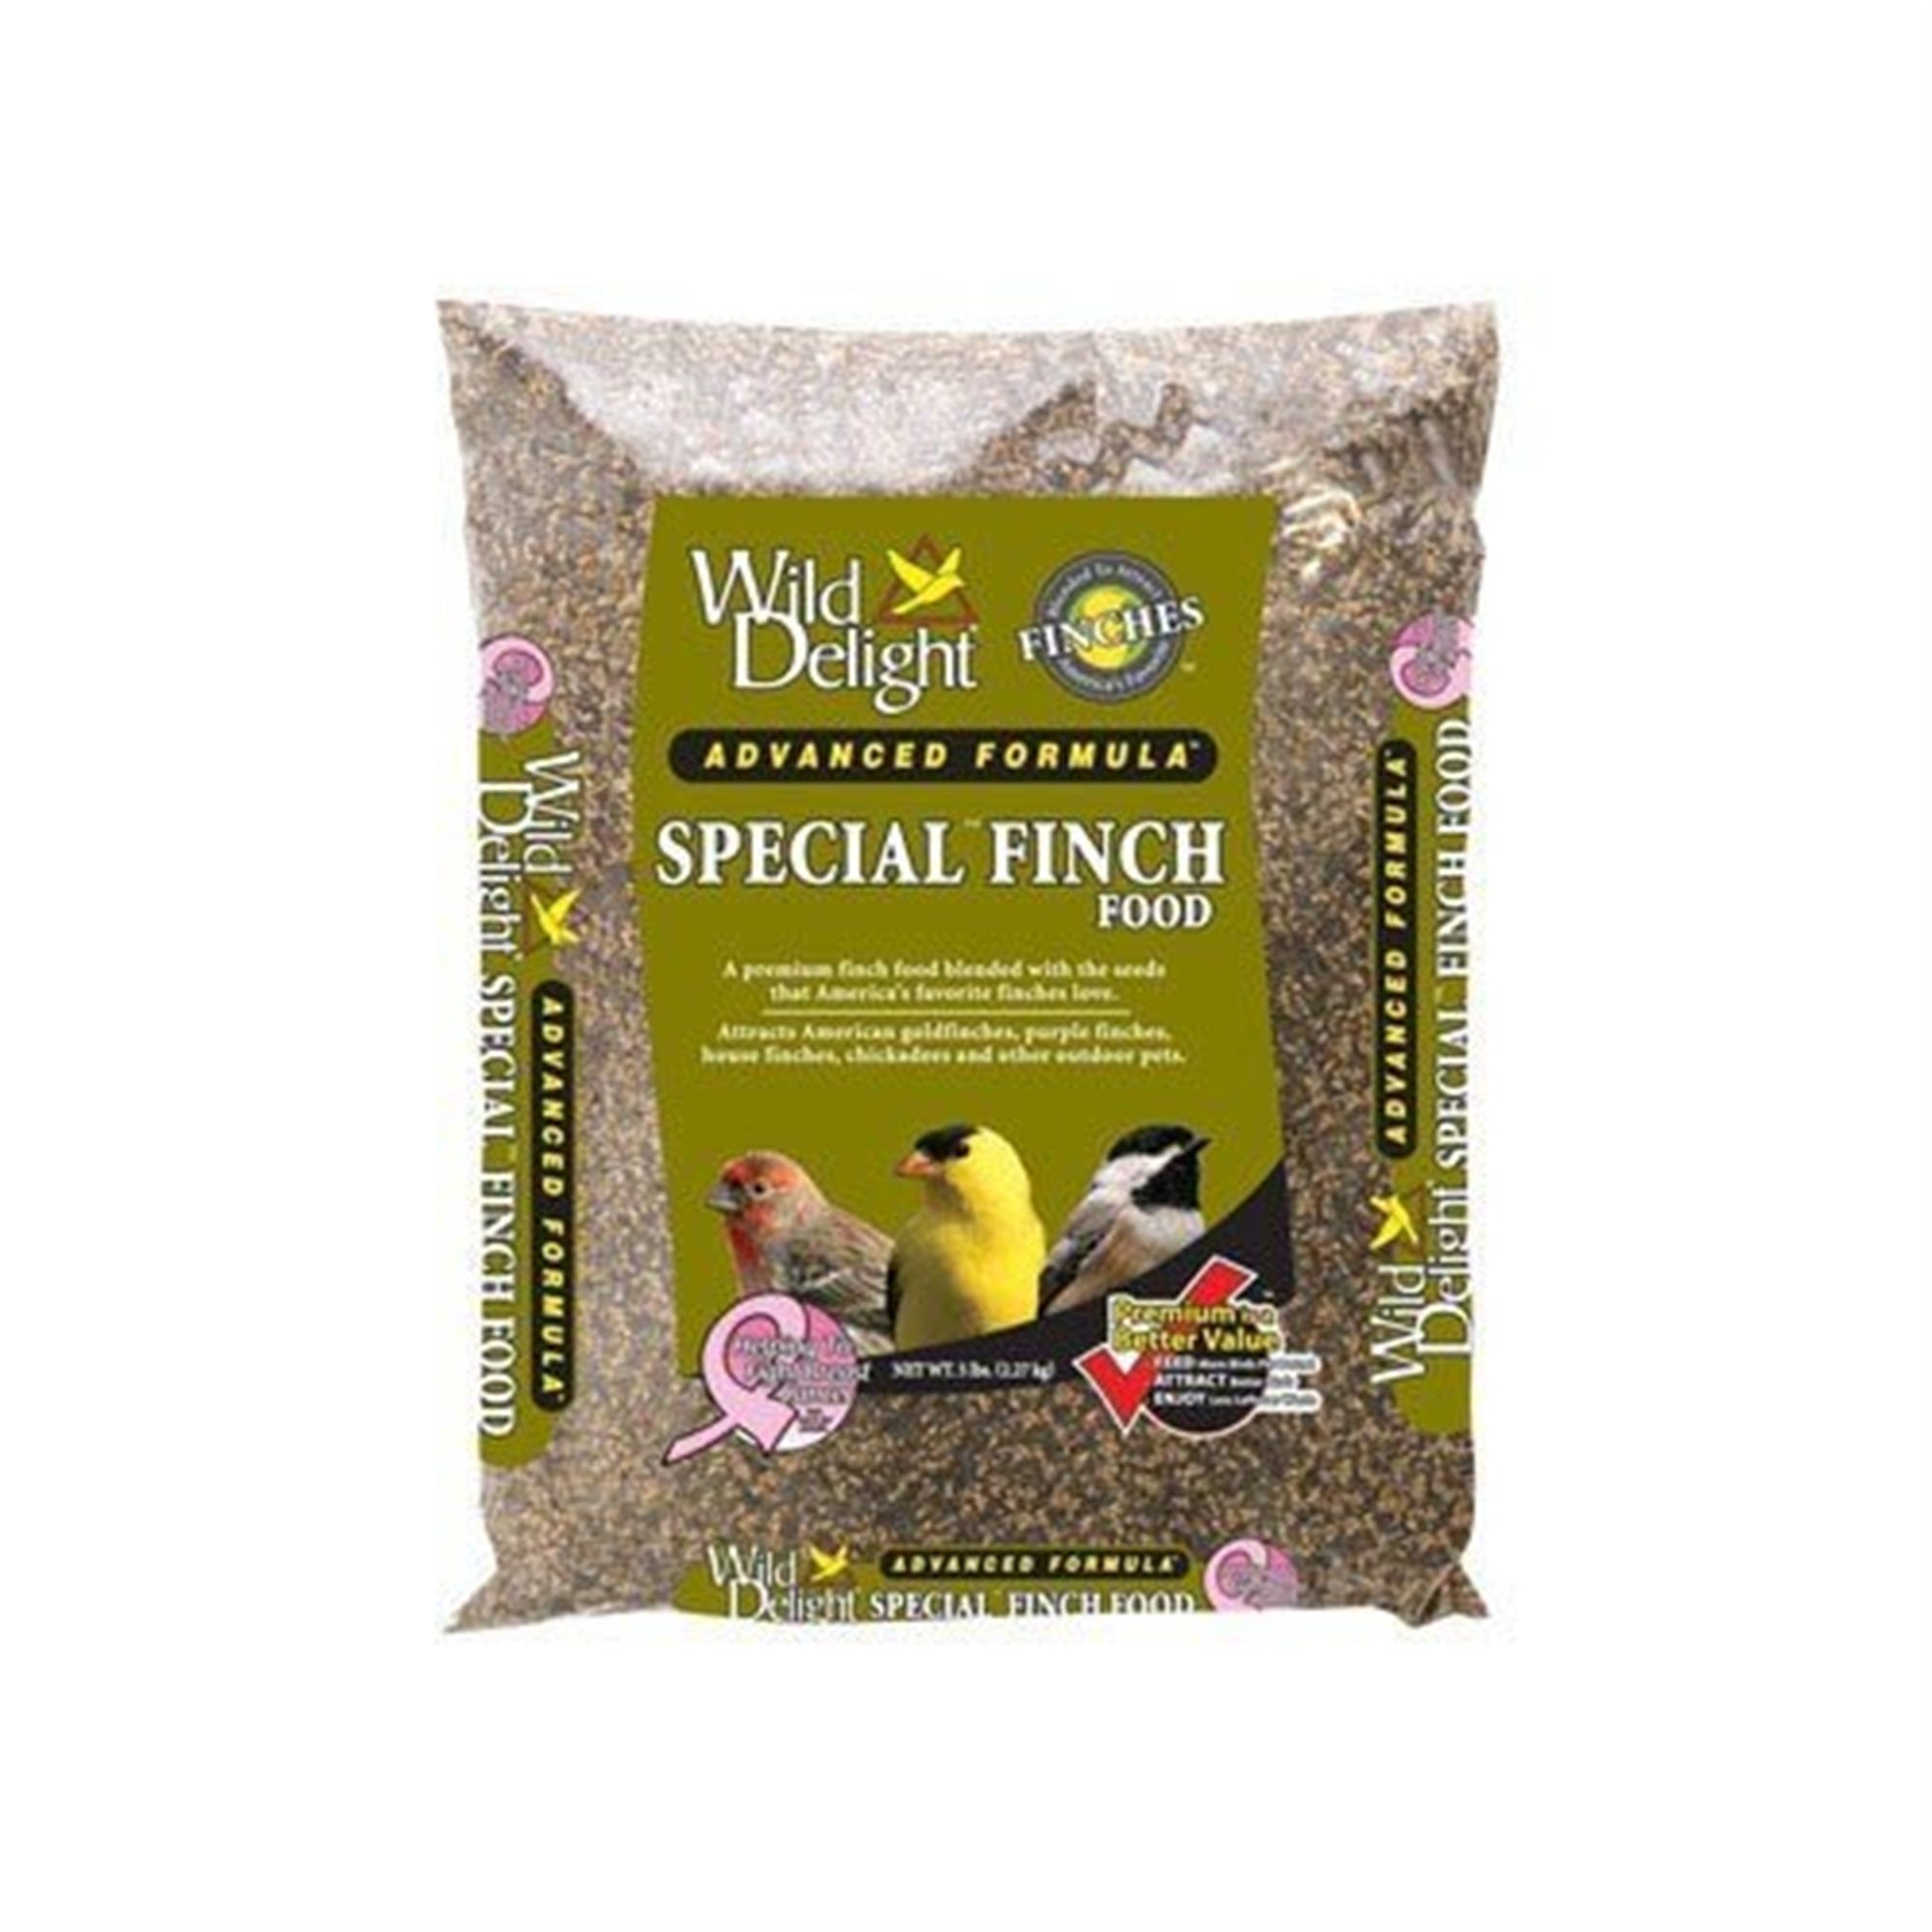 Wild Delight Special Finch Food Niger Seed,Sunflower Kernels 5 Lbs.